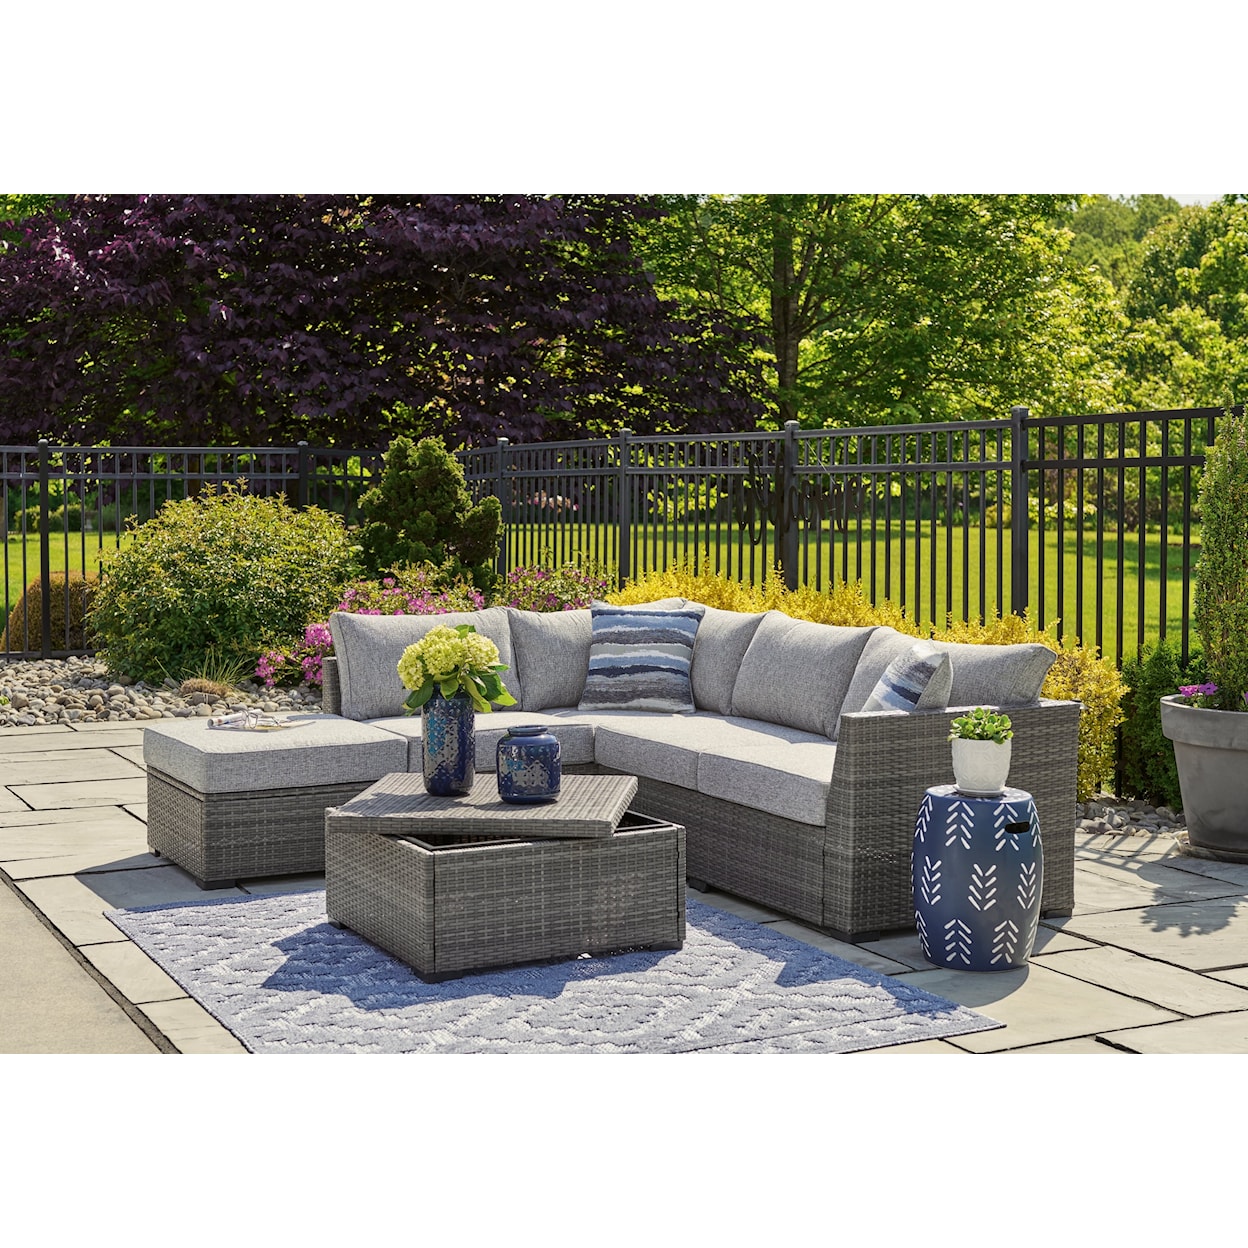 Signature Design Petal Road Outdoor Sectional Set with Ottoman & Table